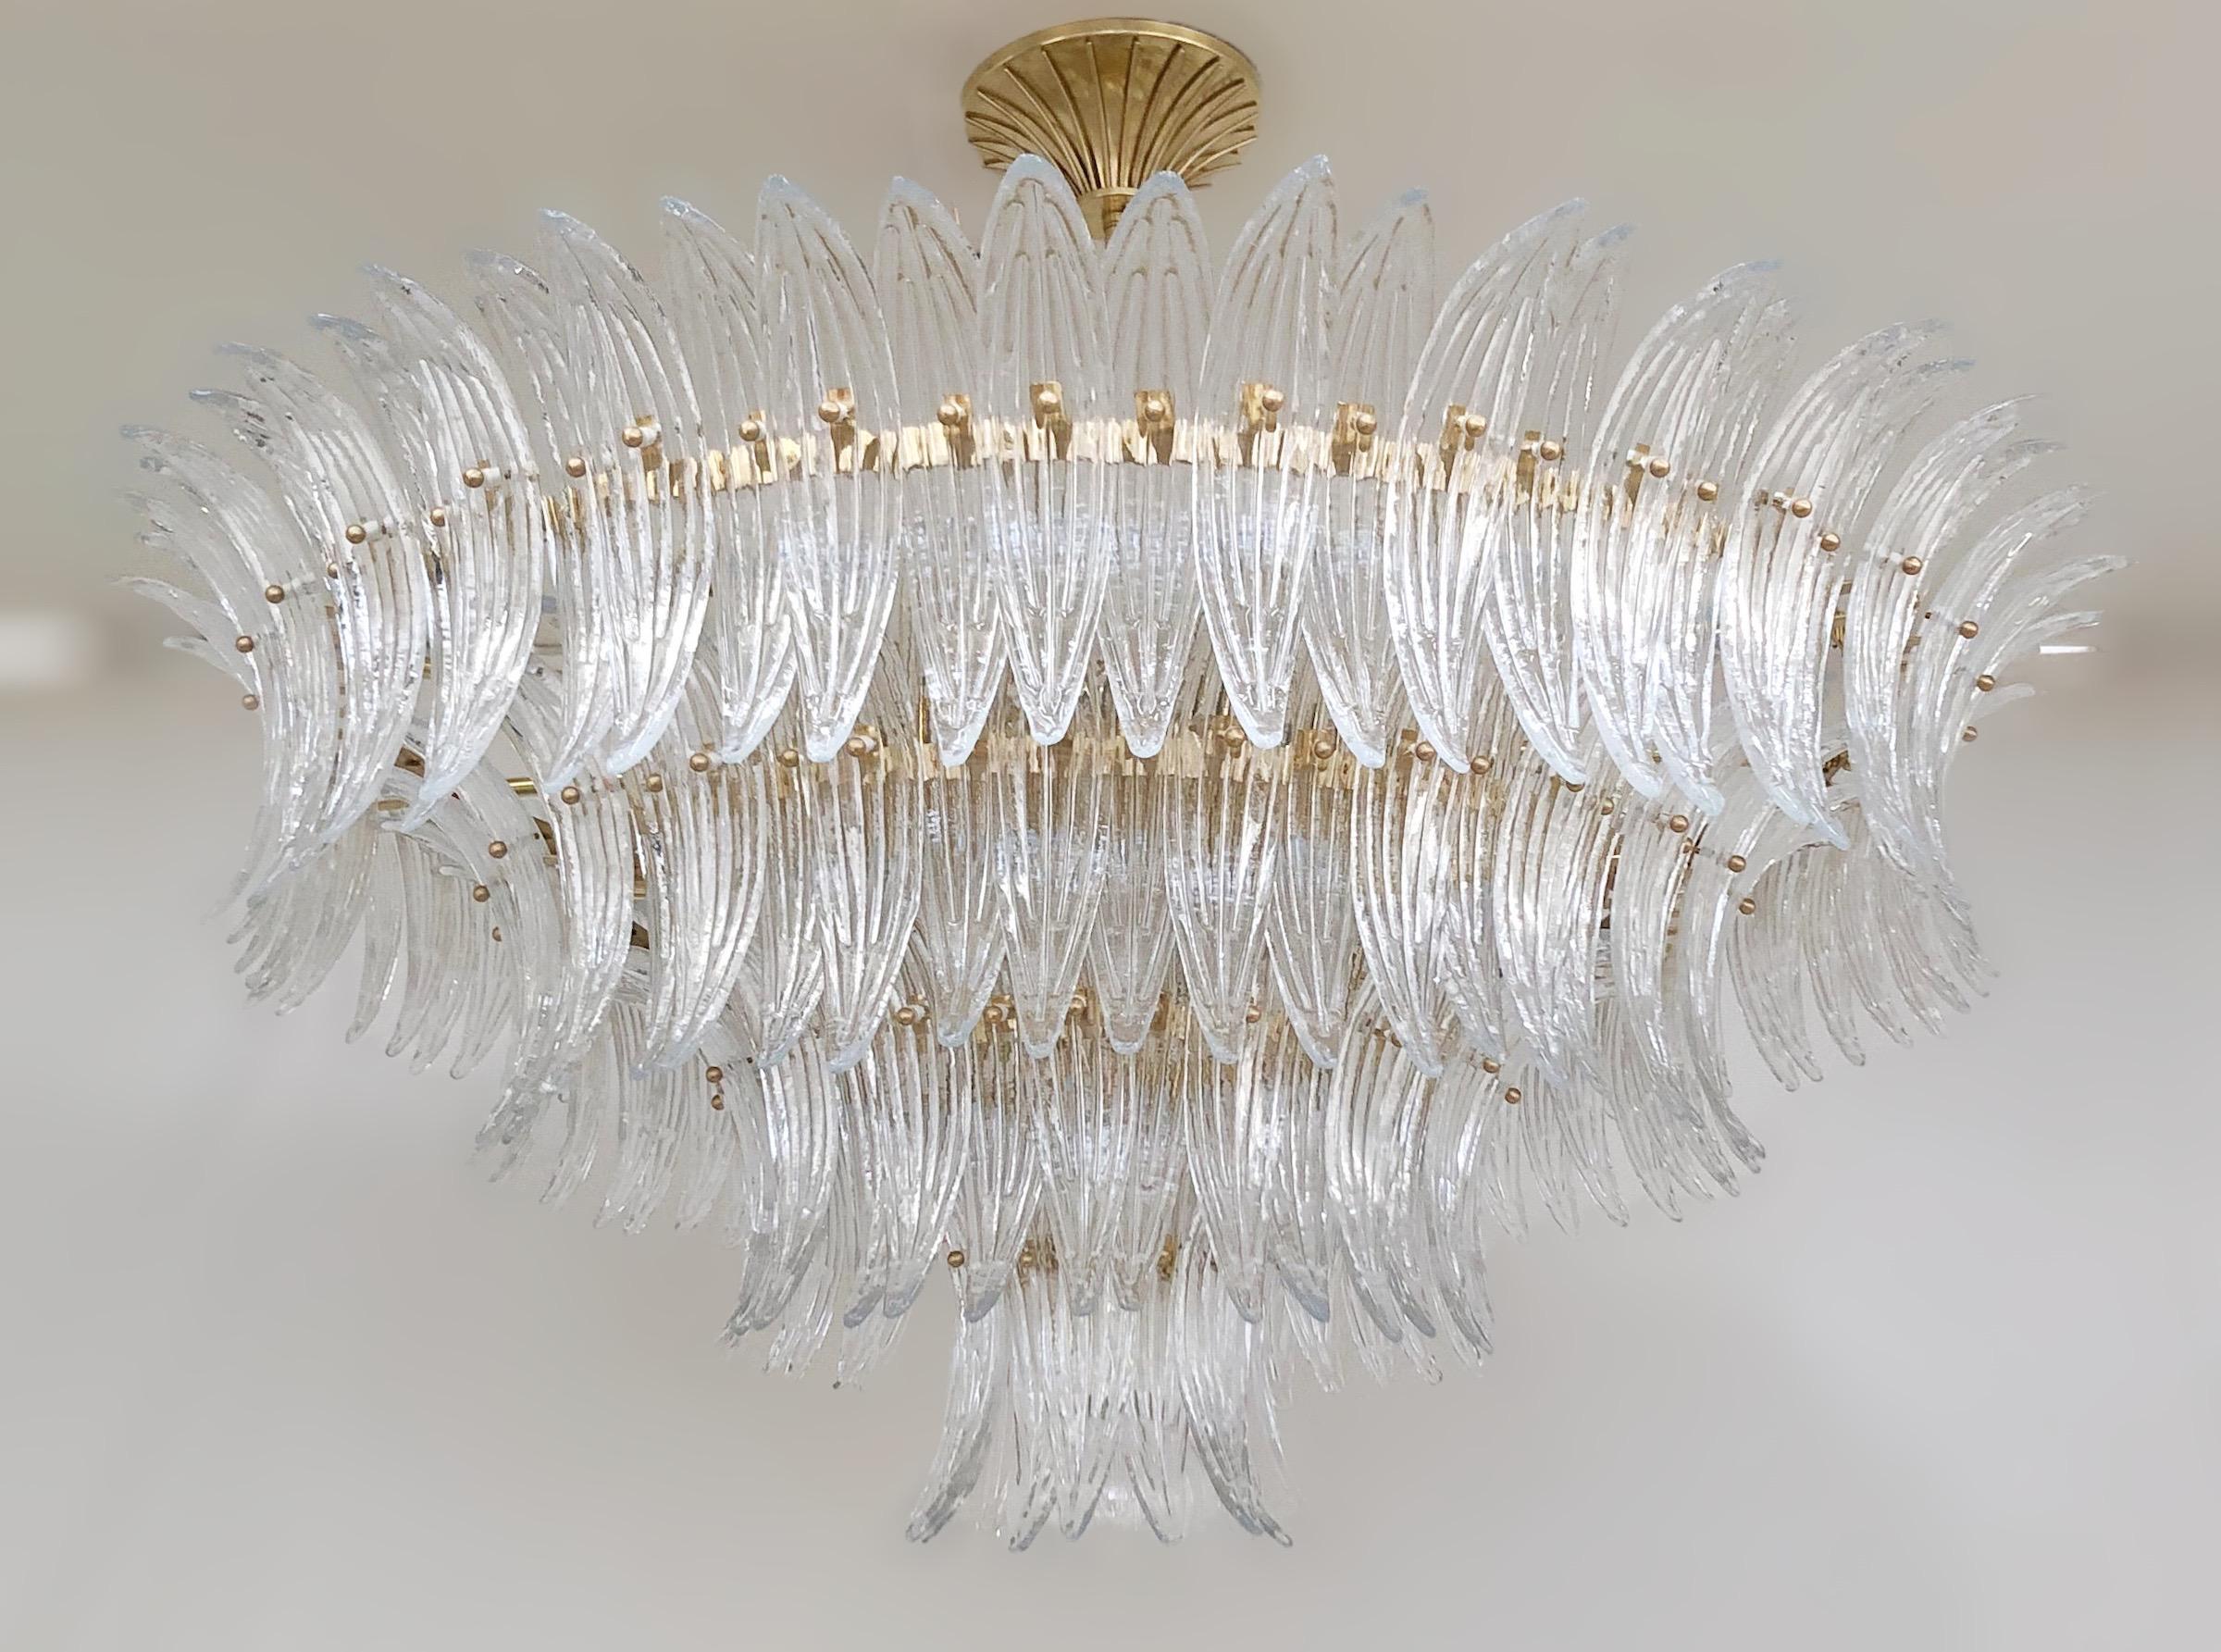 Italian Palmette chandelier shown in clear Murano glass leaves mounted on unlacquered natural brass finish frame with a clear glass ball / Made in Italy
Diameter 47 inches, height 22 inches, total height 35.5 inches including rod and canopy
12